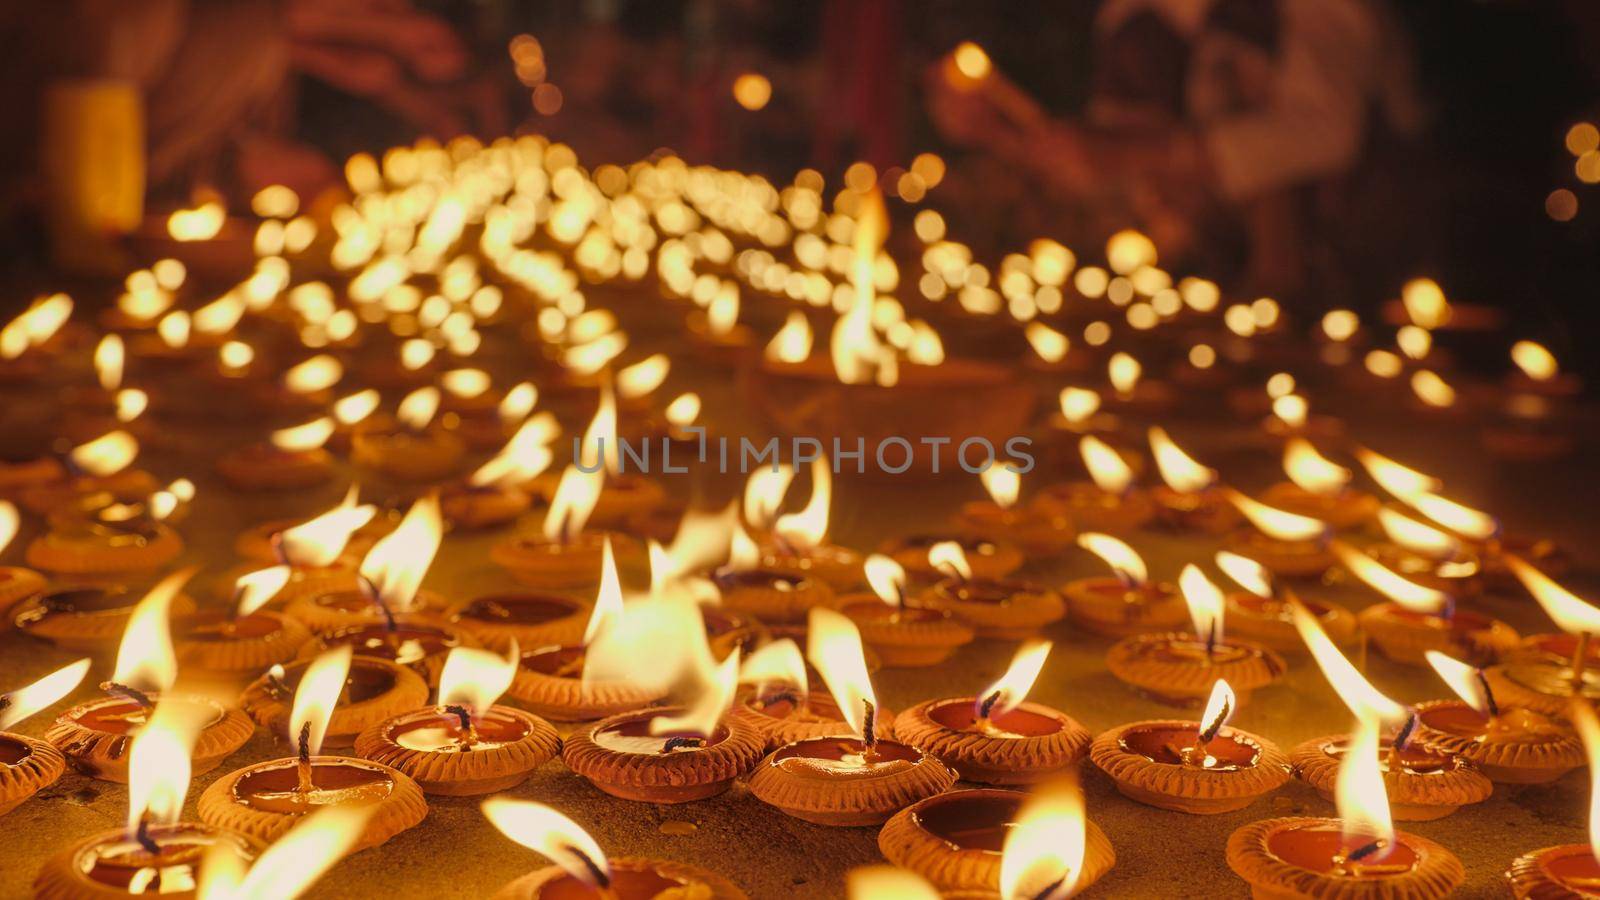 candlelight in religion ceremony with shallow depth of field